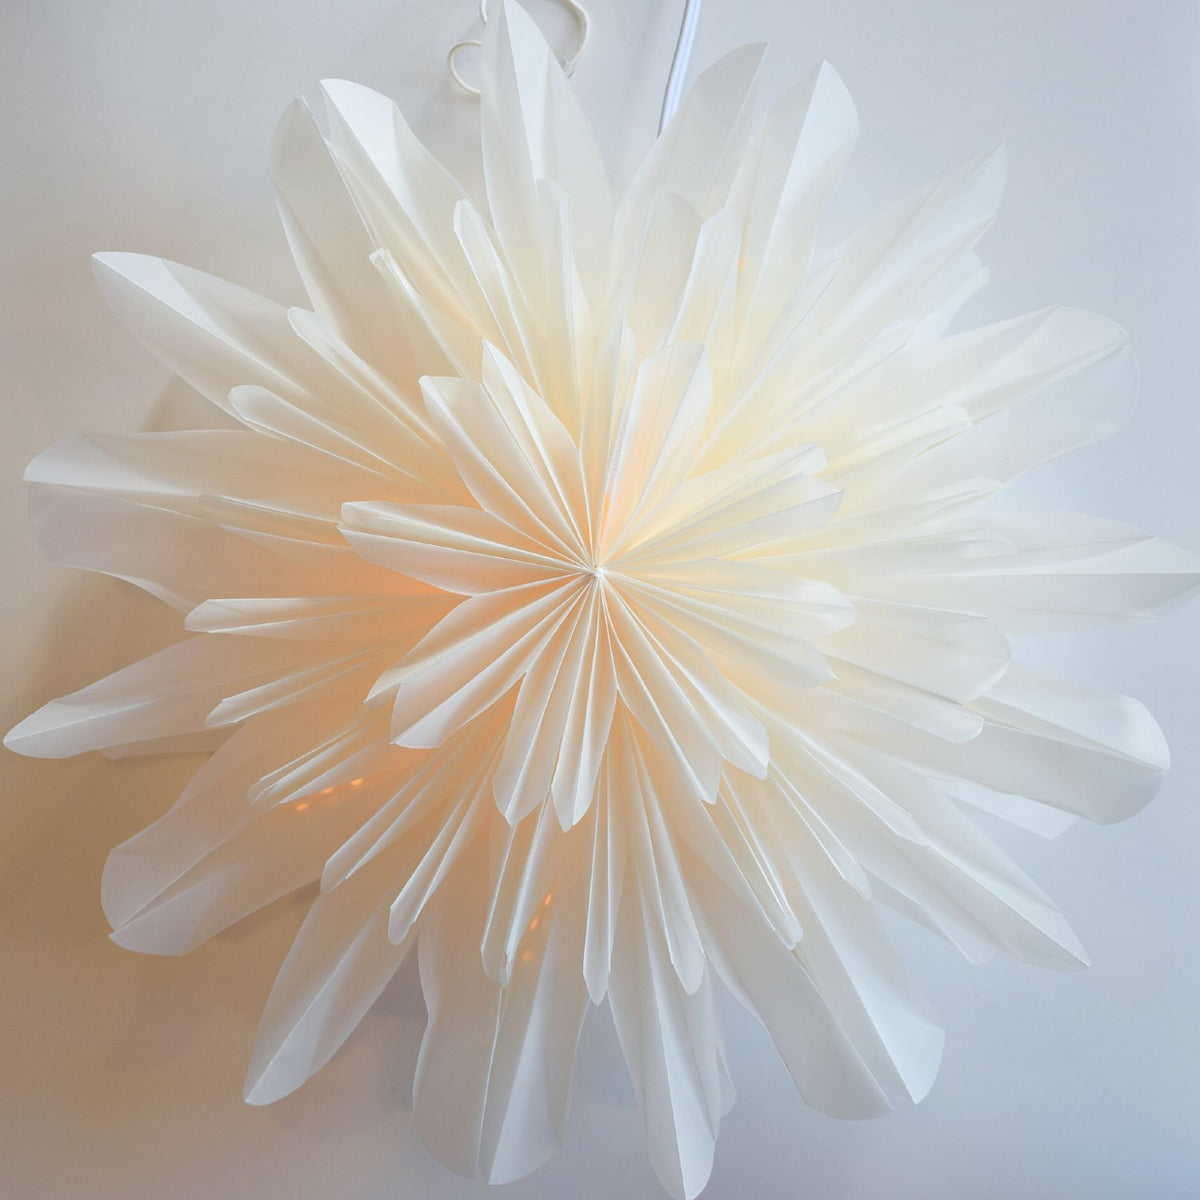 24" White Snowfall Snowflake Star Lantern Pizzelle Design - Great With or Without Lights - Ideal for Holiday and Snowflake Decorations, Weddings, Parties, and Home Decor